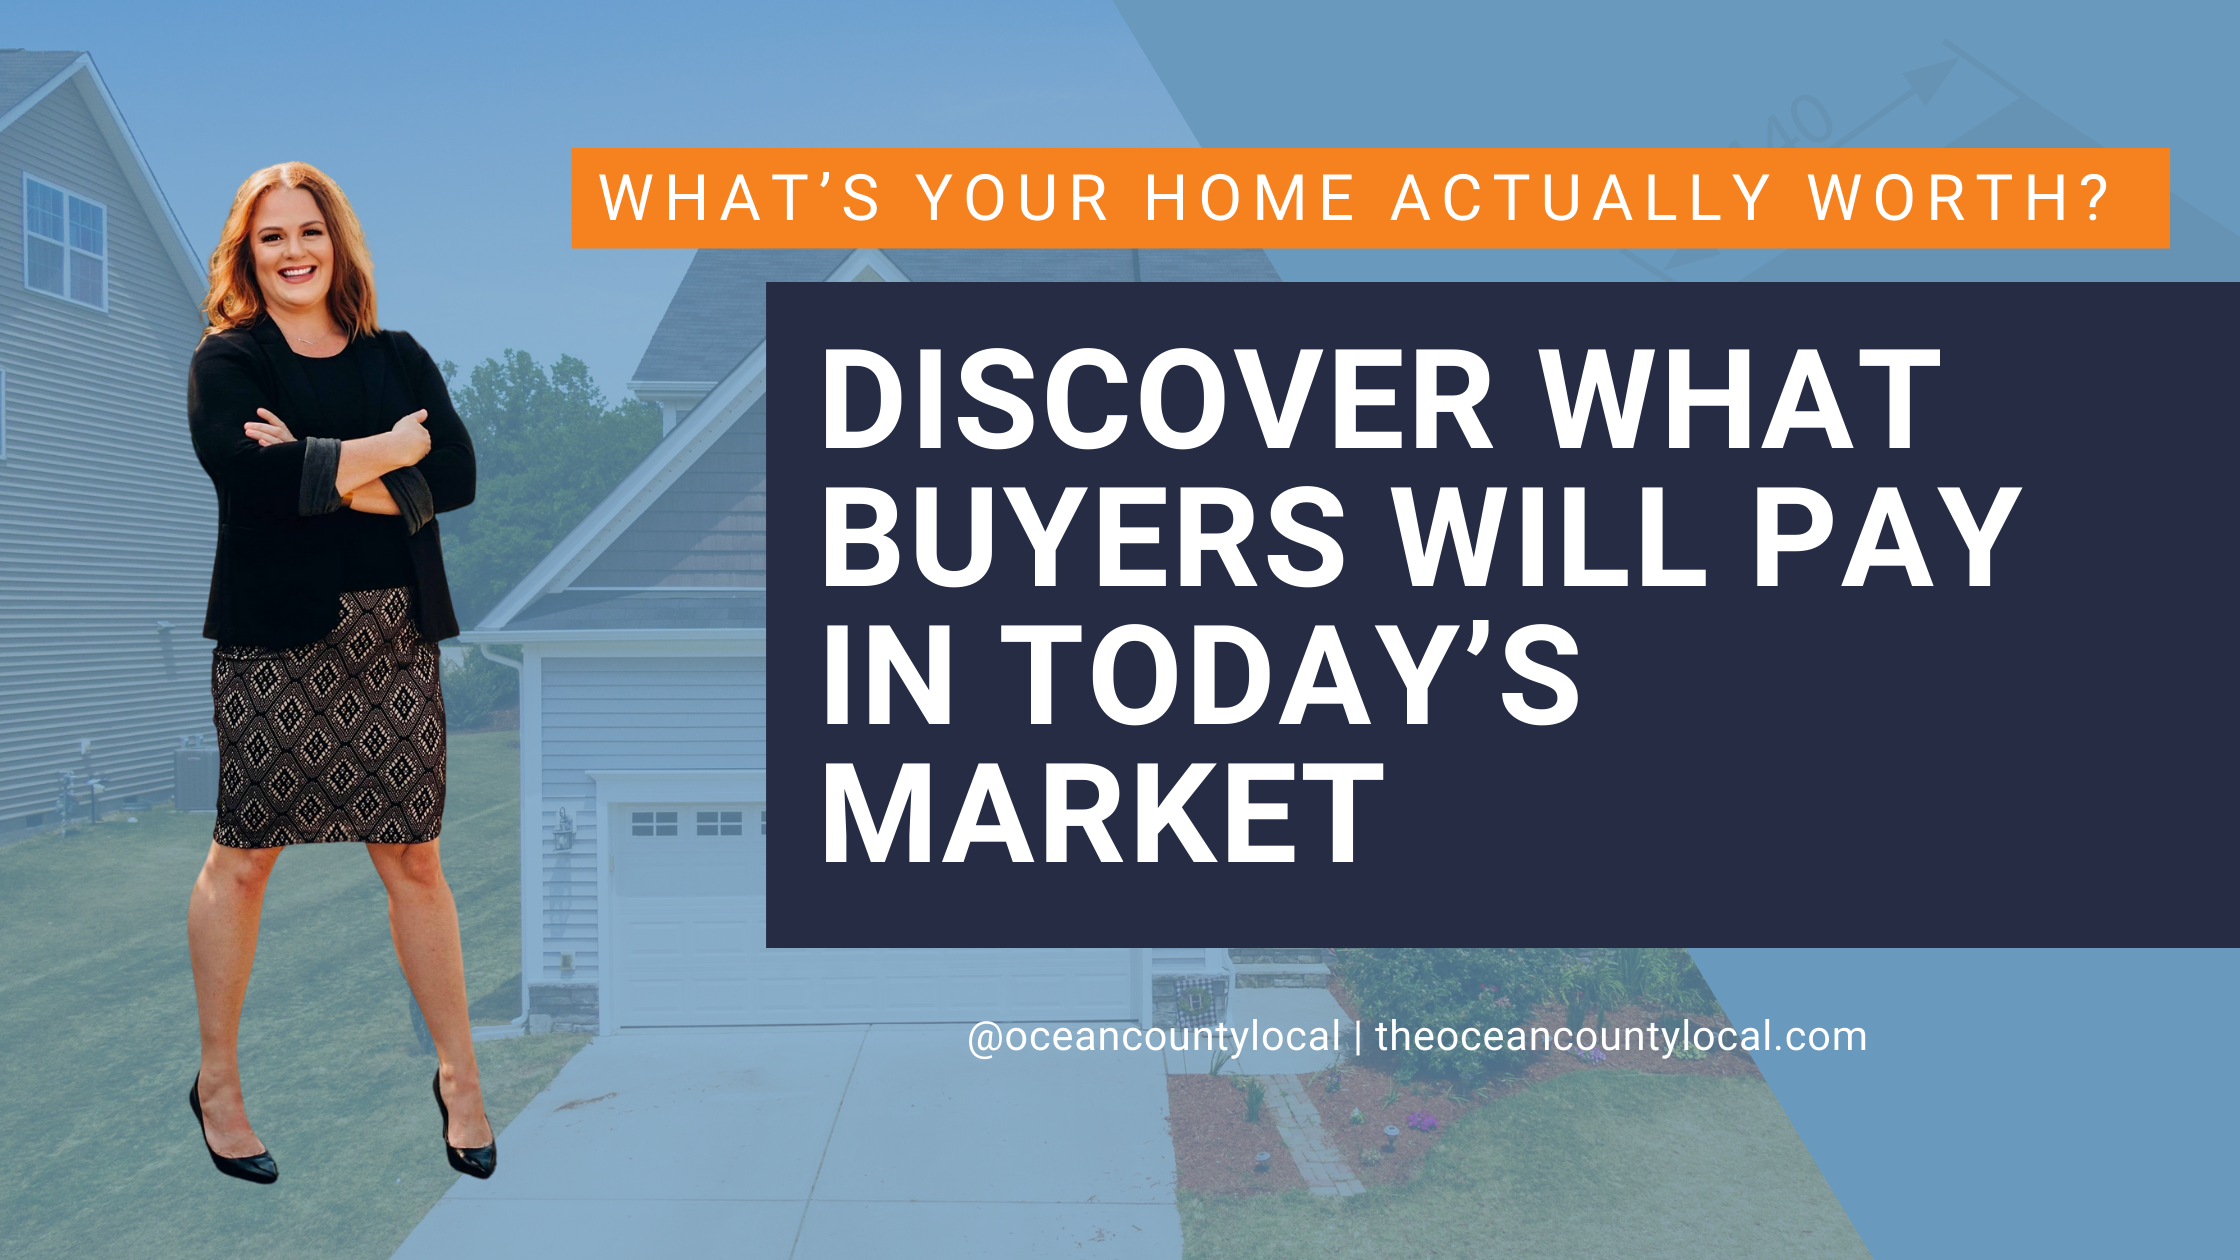 What’s Your Home Actually Worth? Discover What Buyers Will Pay in Today’s Market